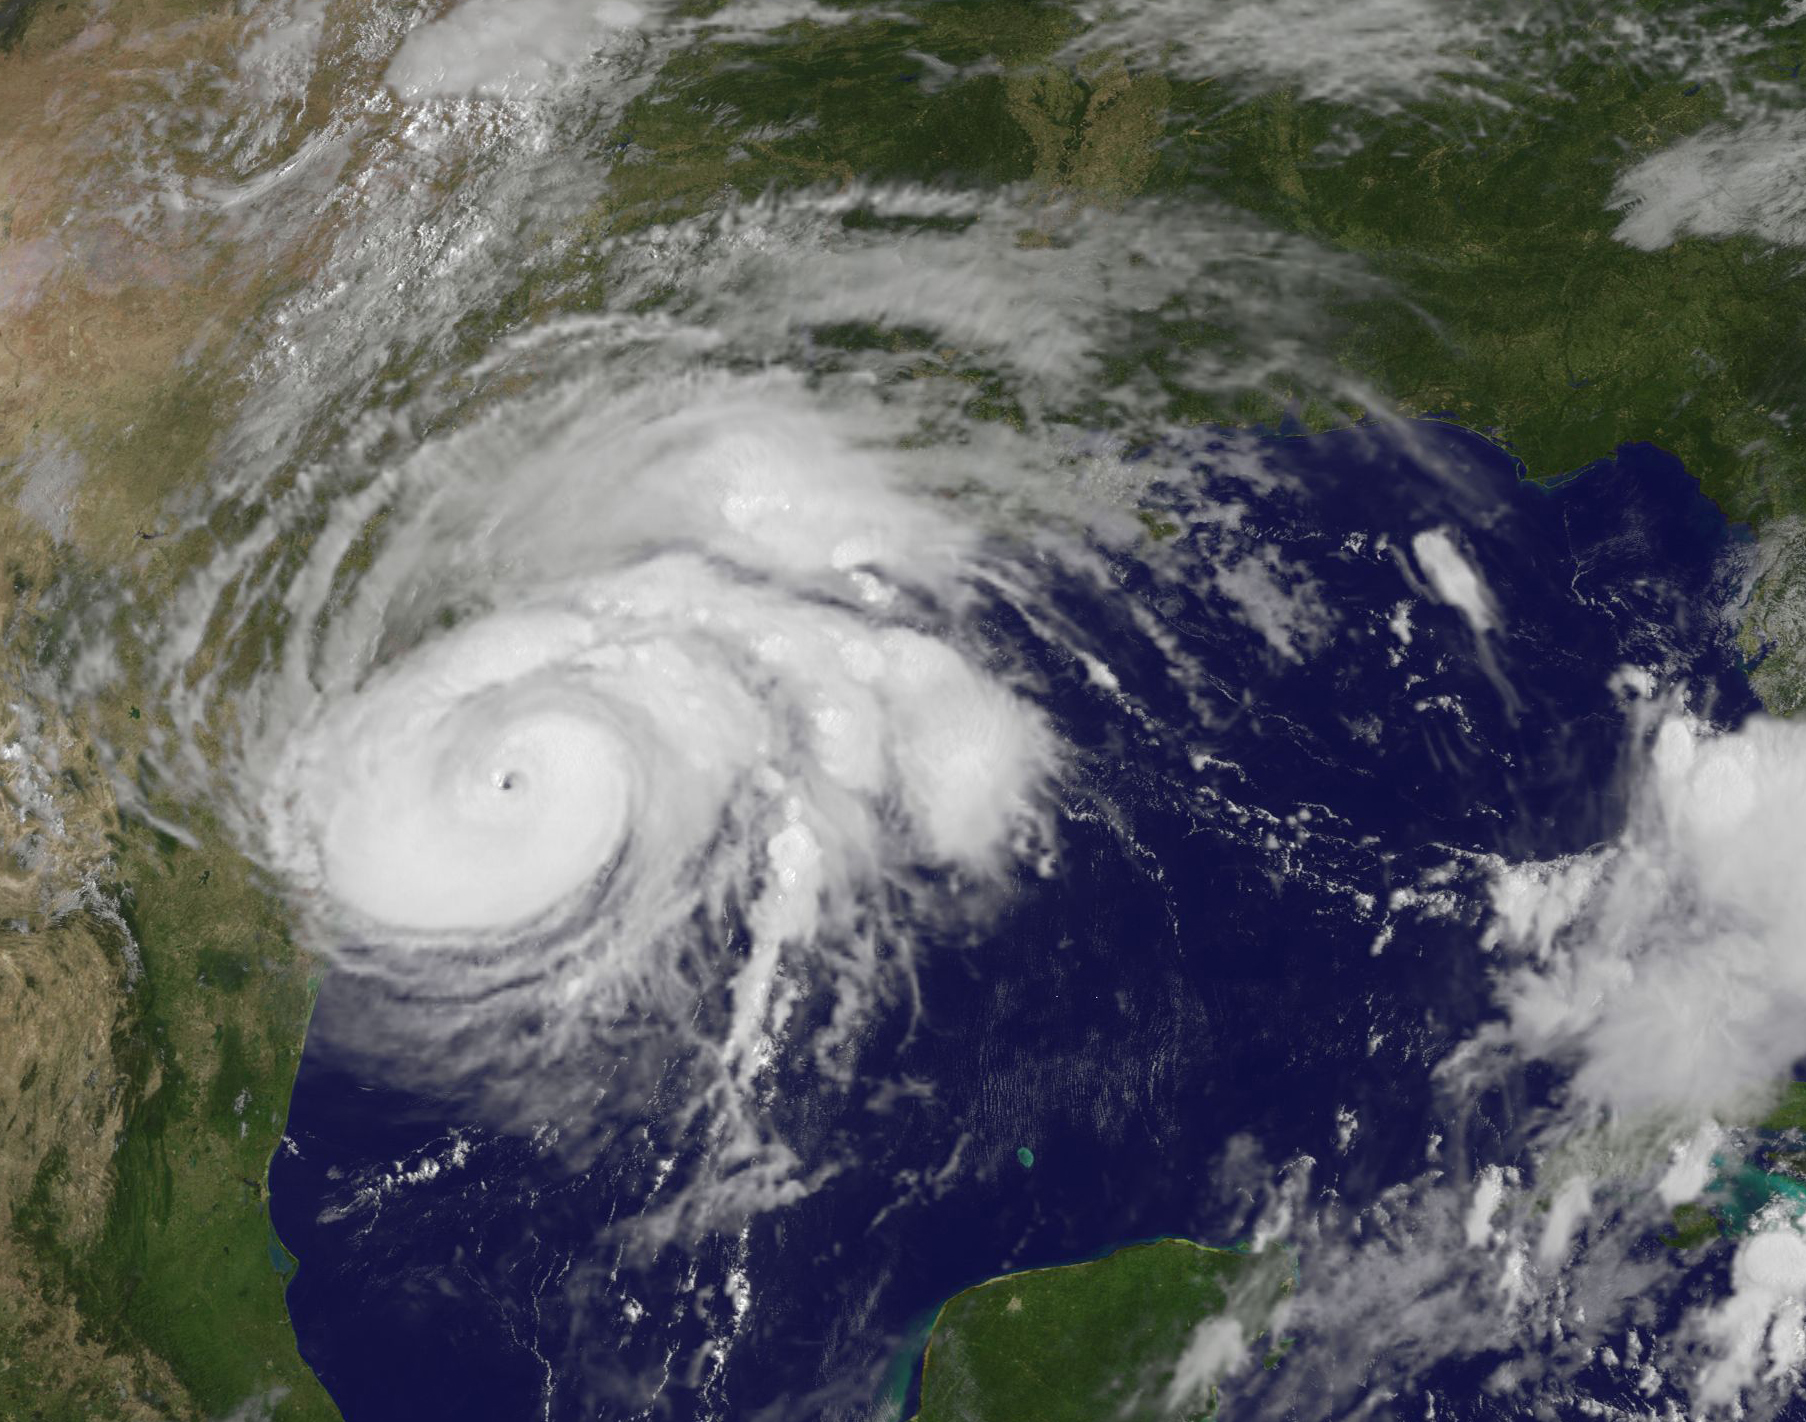 In this NOAA handout image, NOAA's GOES East satellite capture of Hurricane Harvey shows the storm's eye as the storm nears landfall on Aug. 25, 2017 in the southeastern coast of Texas. (Handout—Getty Images)